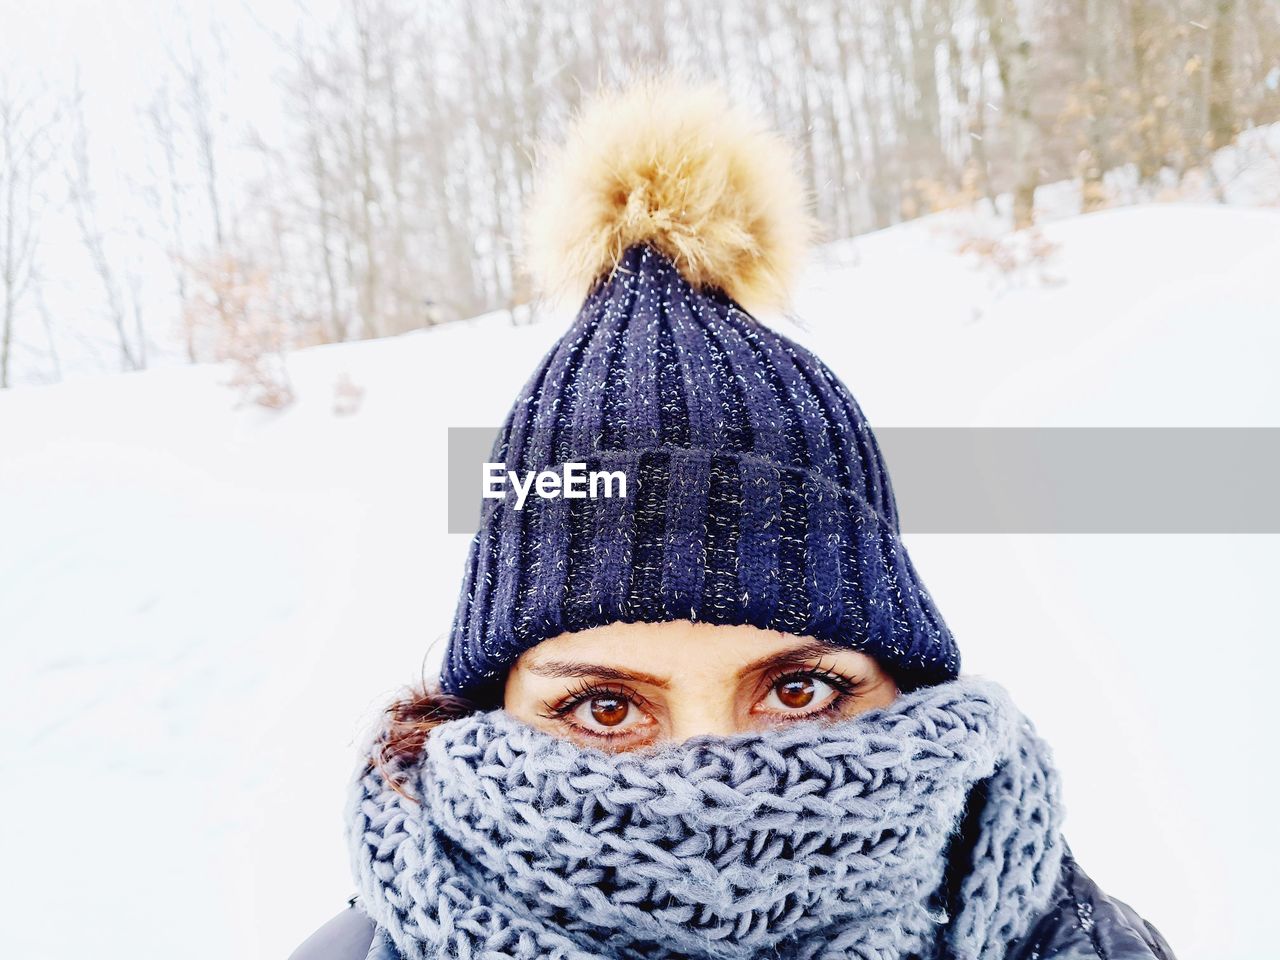 winter, cold temperature, clothing, snow, portrait, one person, warm clothing, headshot, hat, knit hat, looking at camera, adult, cap, nature, fashion accessory, front view, covering, scarf, tree, knit cap, art, glove, women, young adult, day, leisure activity, mitten, fun, outdoors, child, lifestyles, human face, childhood, wool, emotion